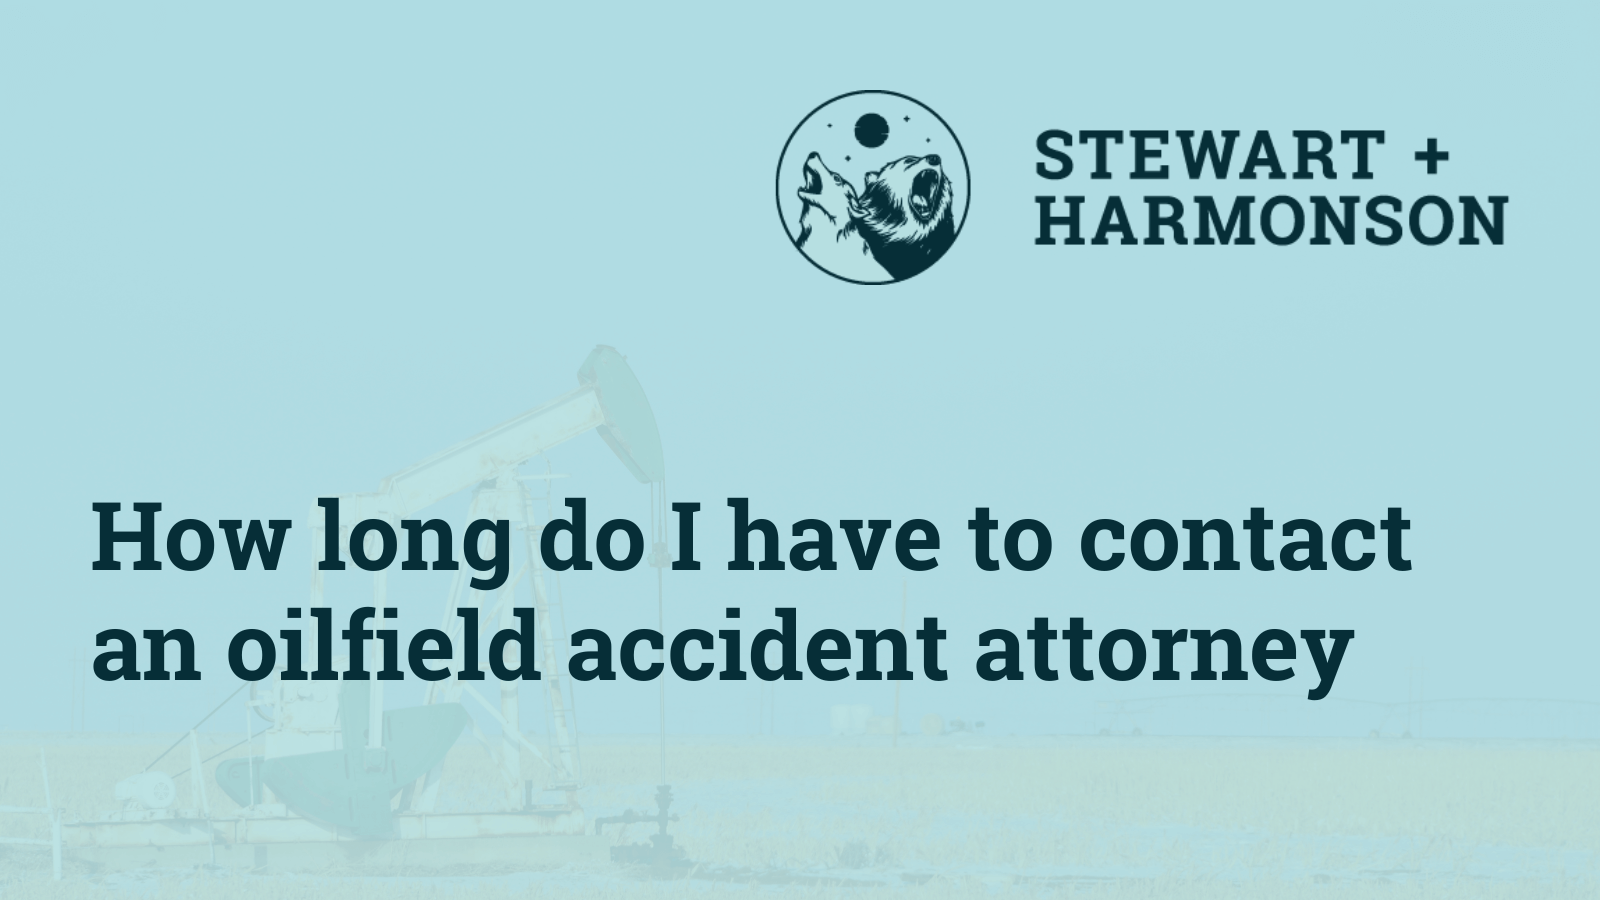 contact an oilfield accident attorney - Stewart Harmonson Law Firm - New Mexico